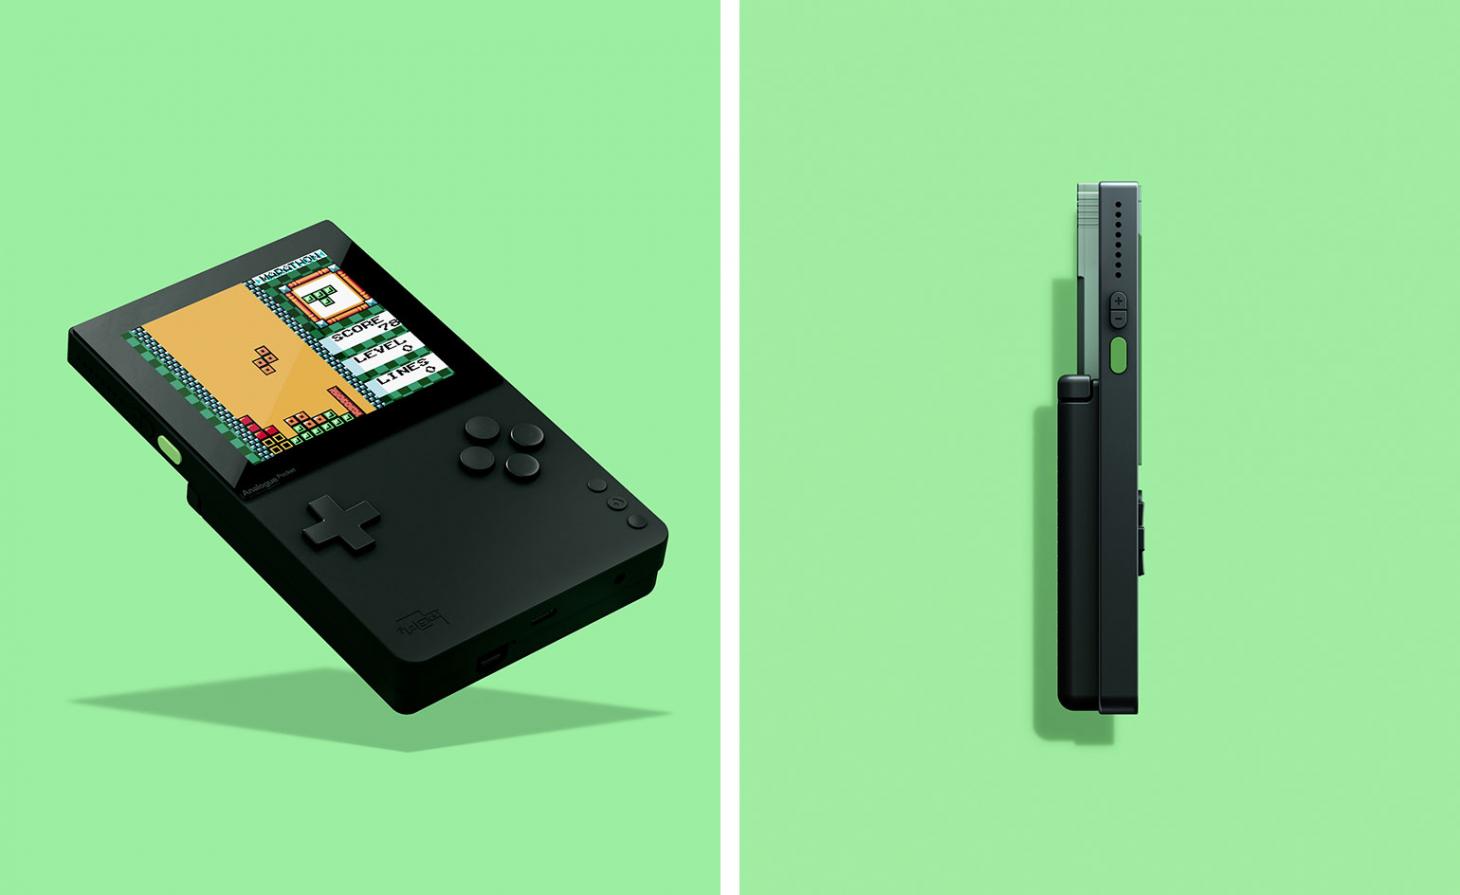 Analoguye Pocket Is A Modern Tribute To Classic Handheld Devices